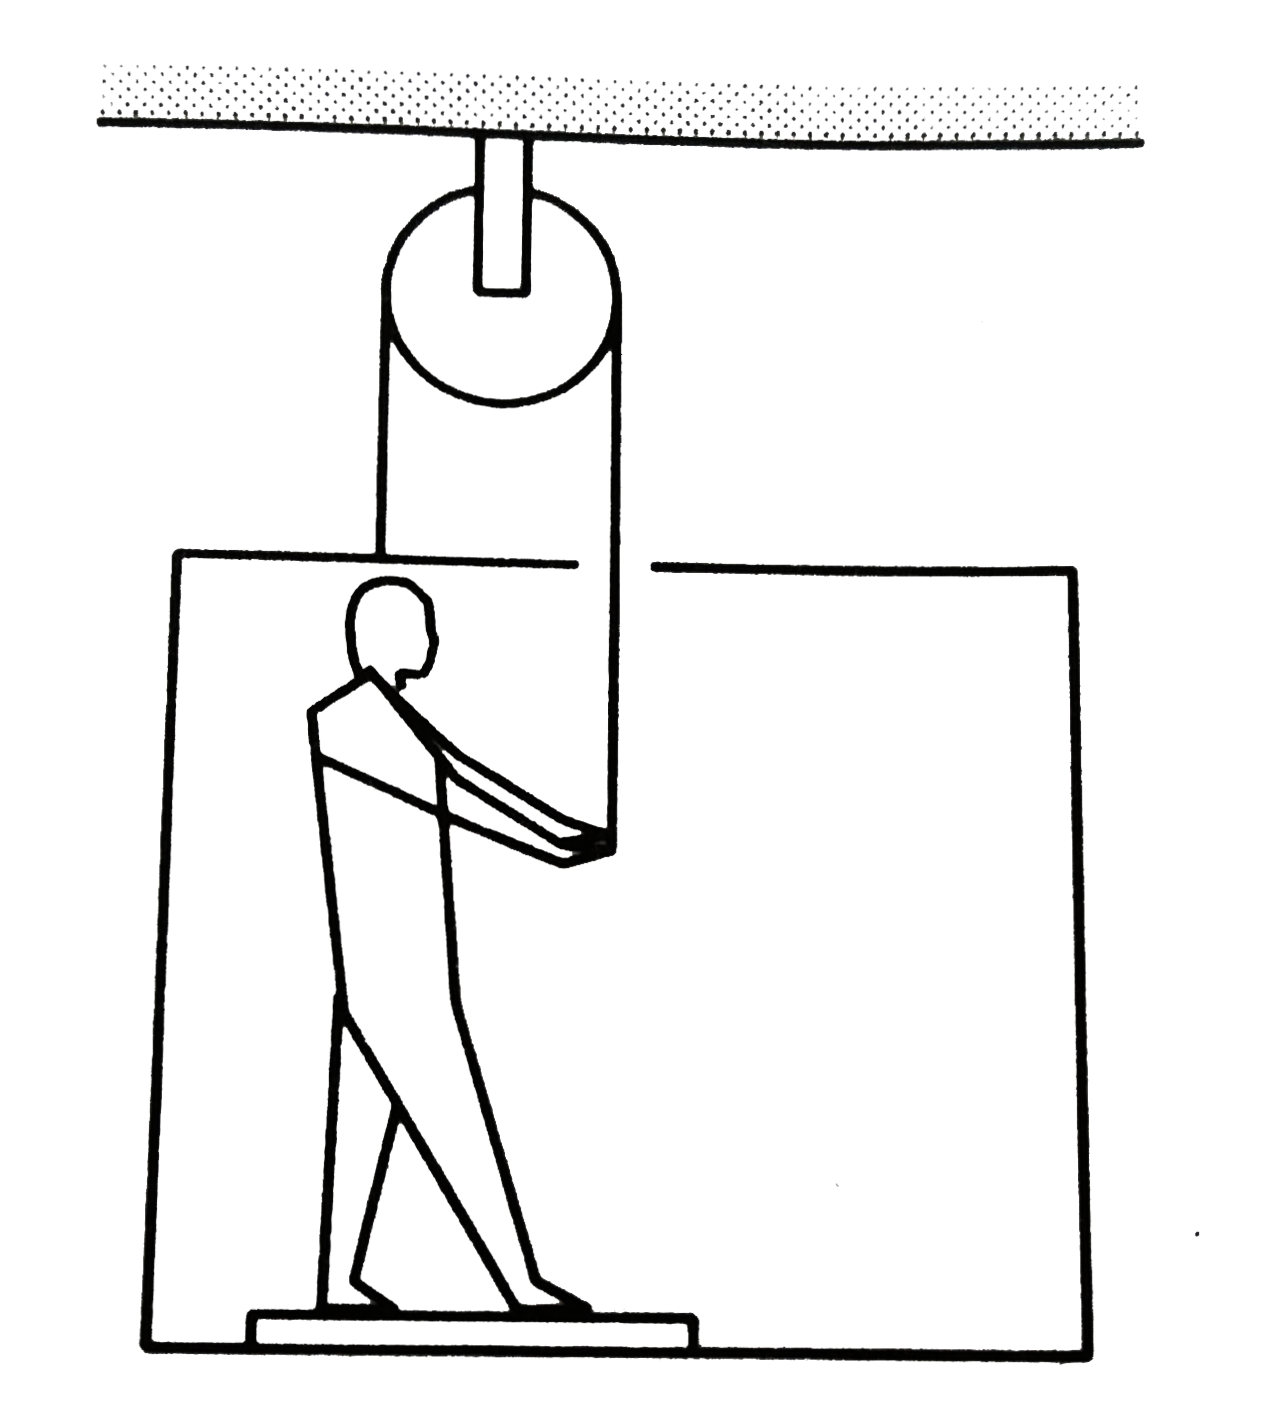 Figure shows a man of mass 60 kg standing on a light weighting machine kept in a box of mass 30 kg. The box is haning from a pulley fixed to the ceiling through a light rope, the other end of which is held by the man himswelf. If the man manages to keepthe box at rest, what is the weight shown by the man manages to keep the box at rest, what is the weight shown by the machine? What force should he exert on the rope to get his correct weight on the machine?